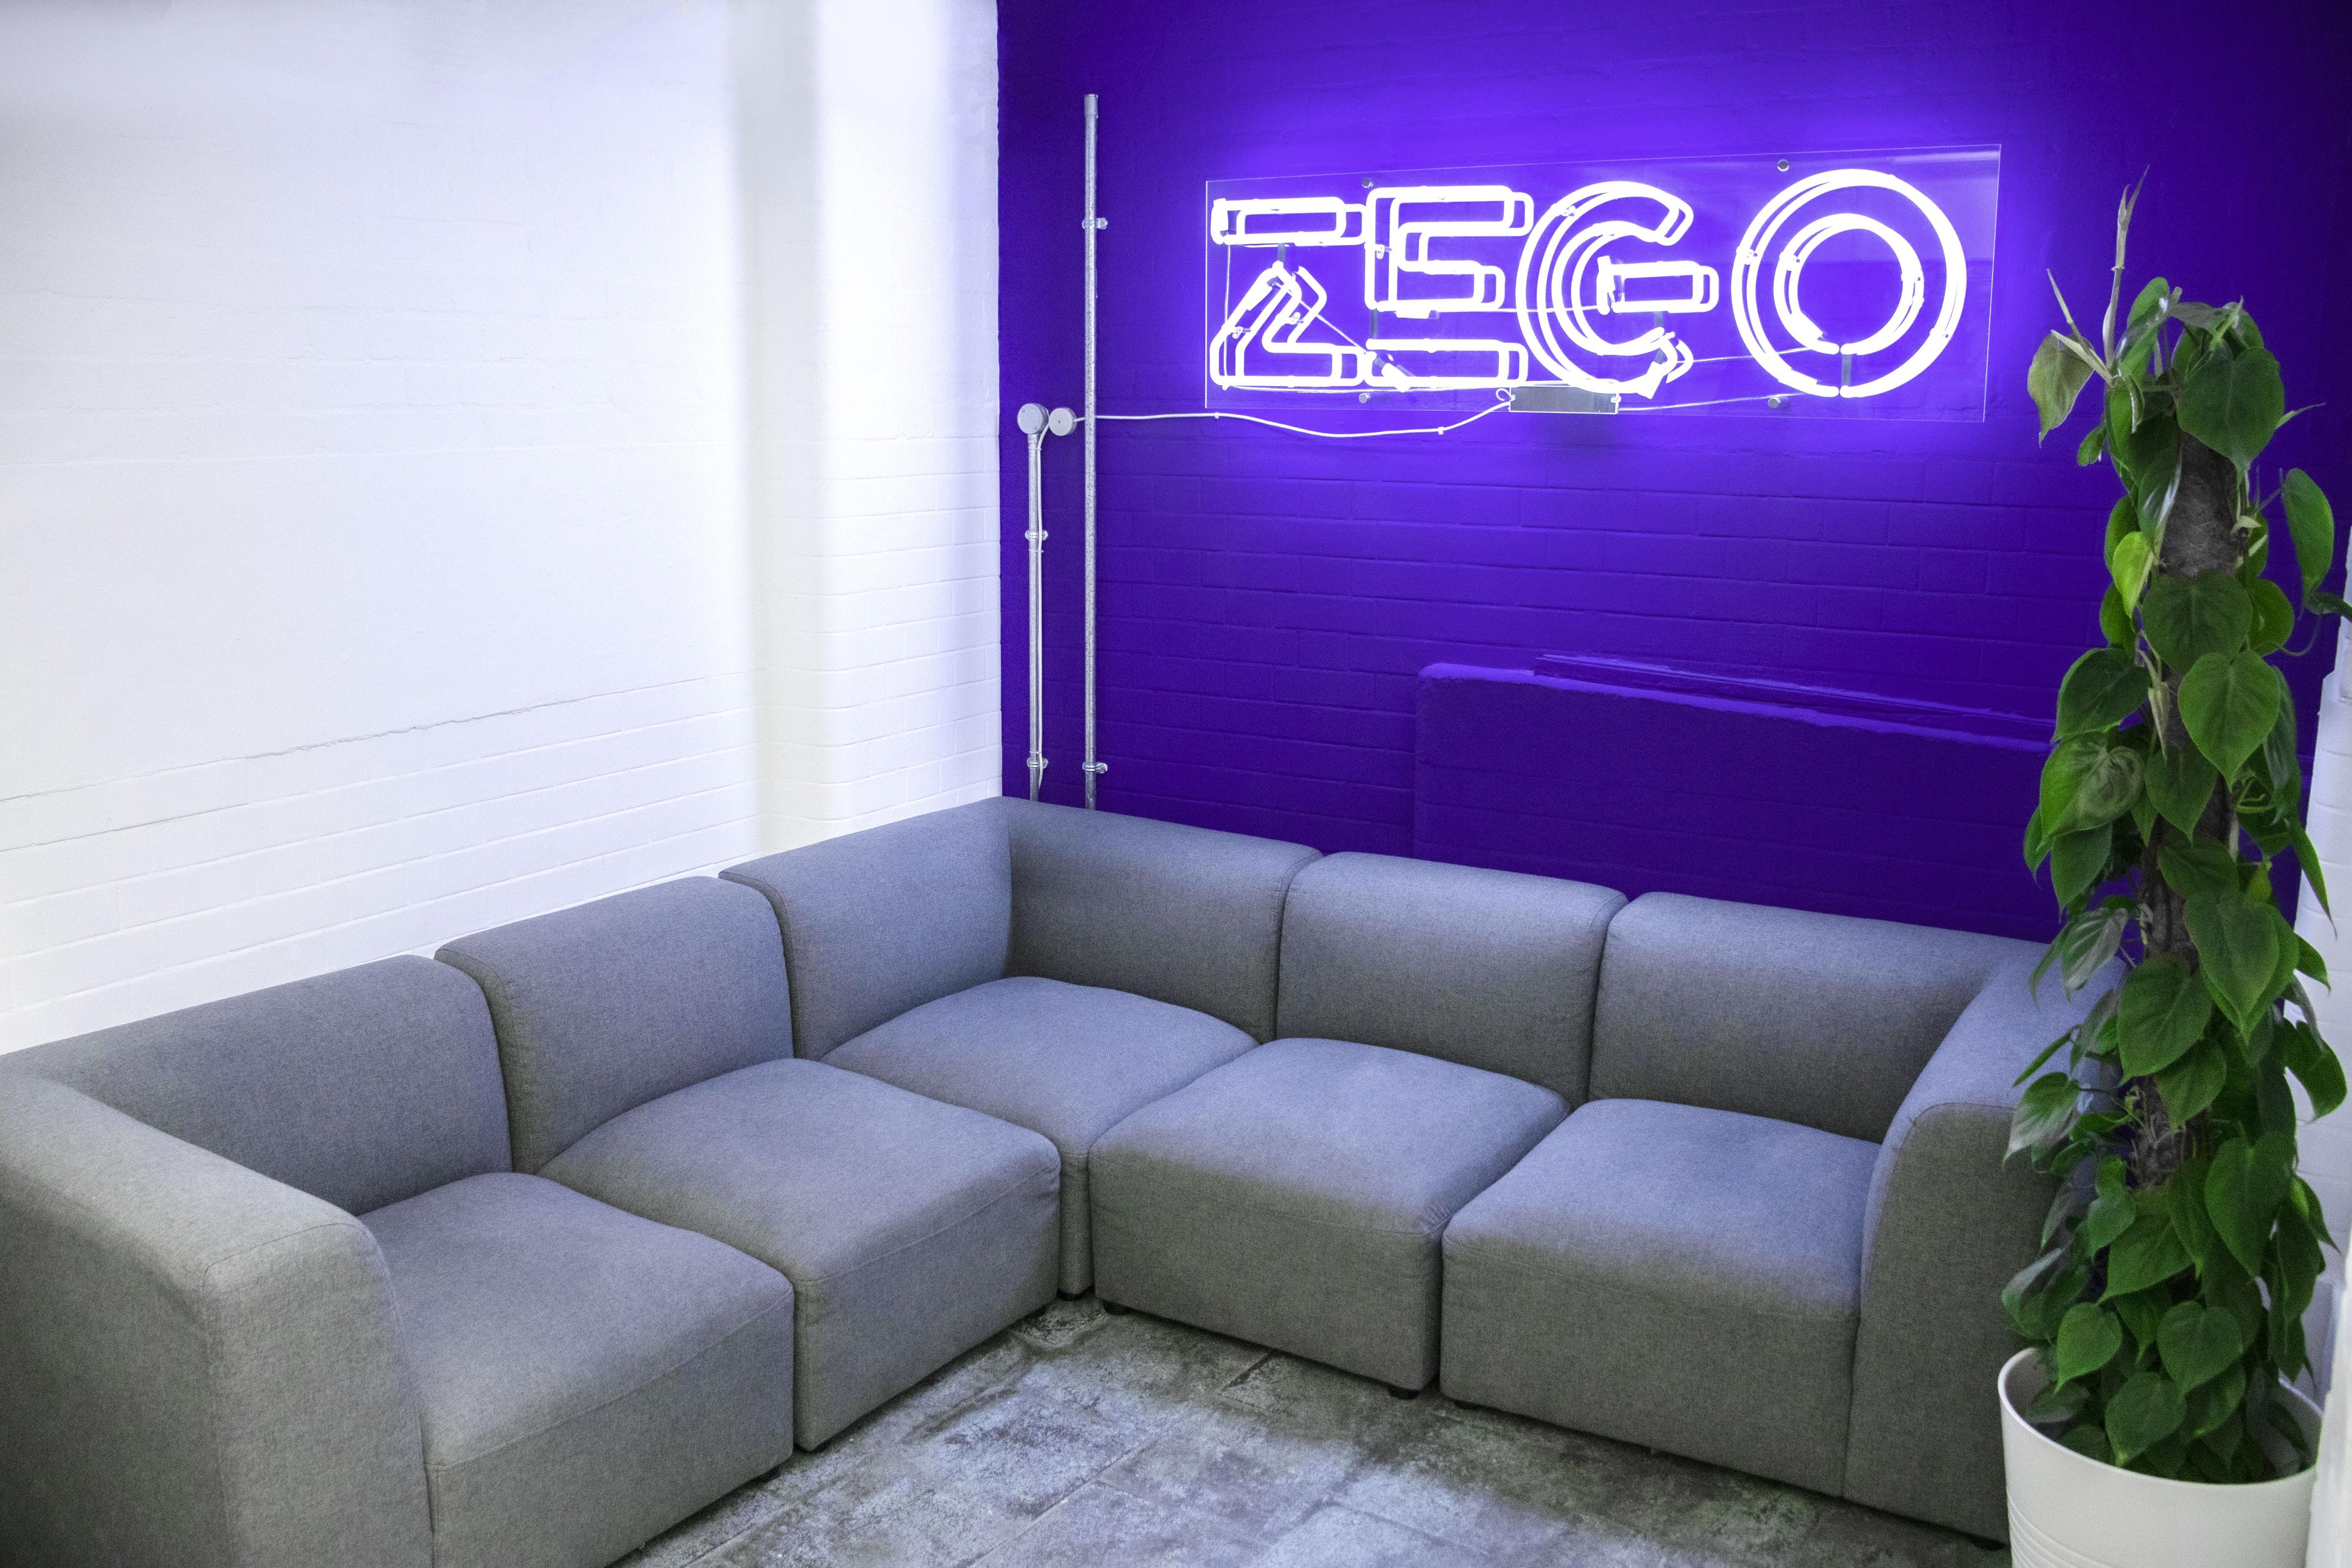 Life at Zego: company benefits and support